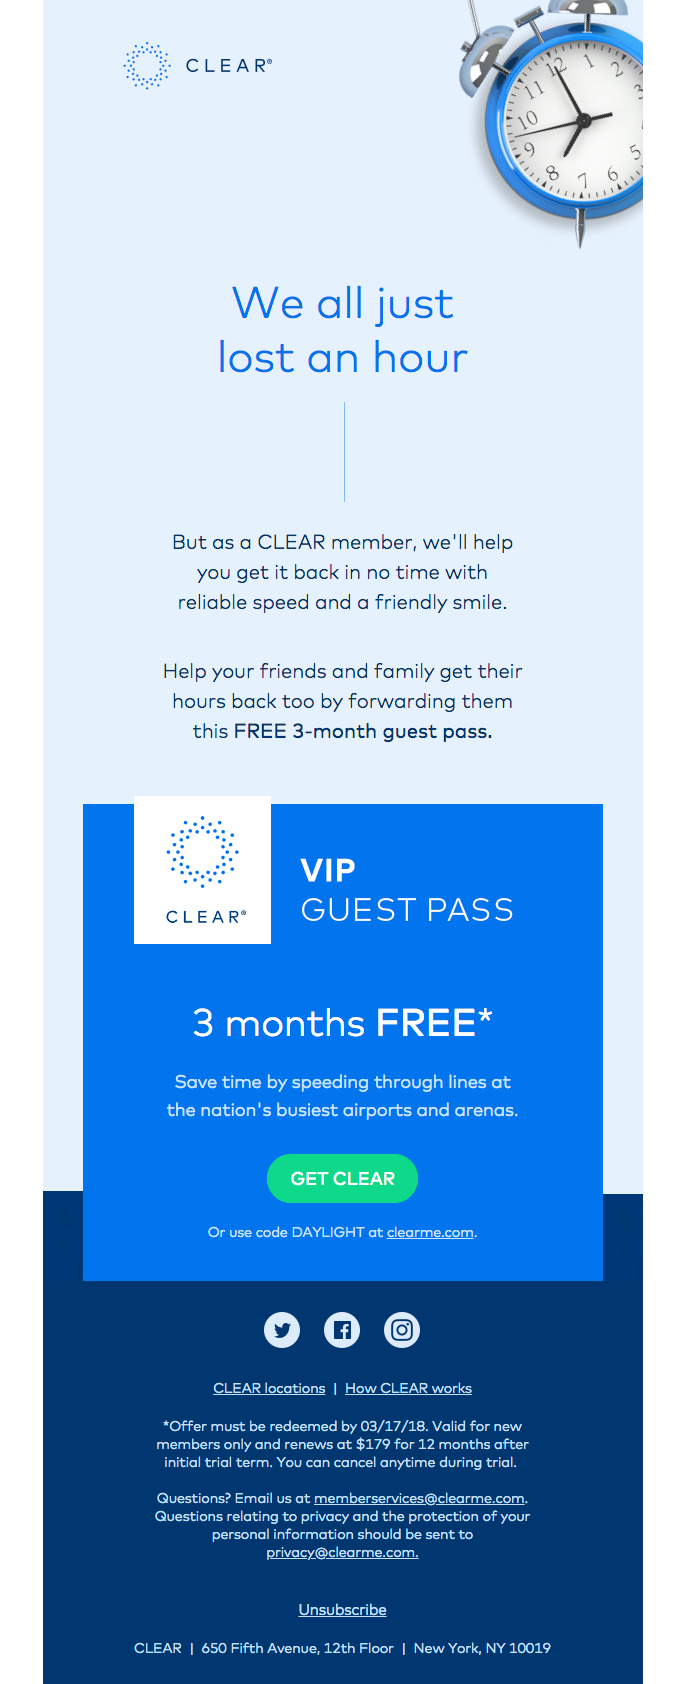 CLEAR B2B email marketing example 